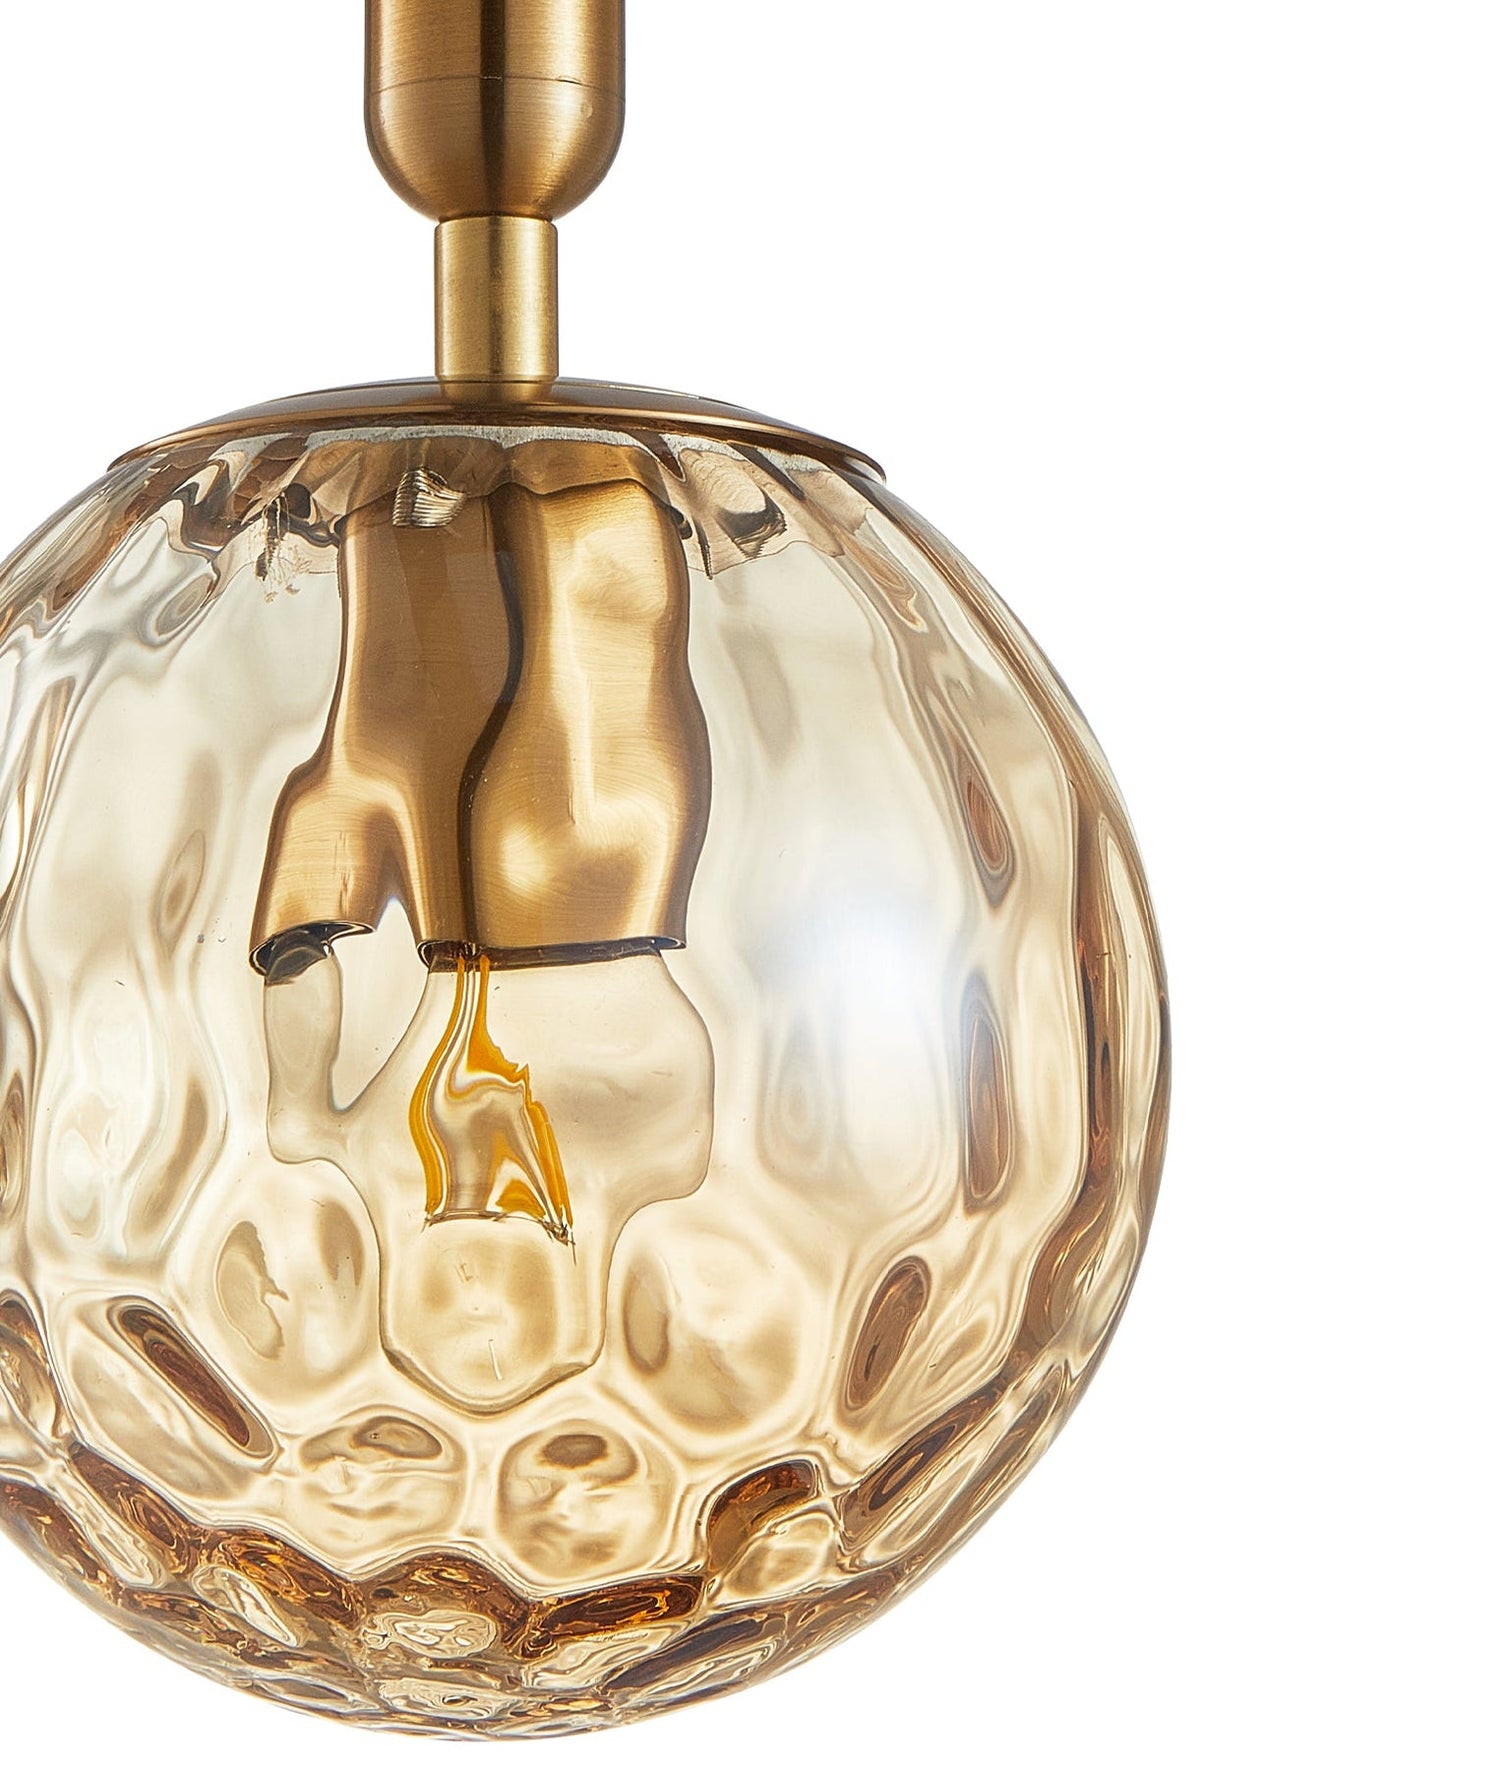 Trattino 3-Light Cluster Bronze and Amber Spherical Dimple Glass Pendant